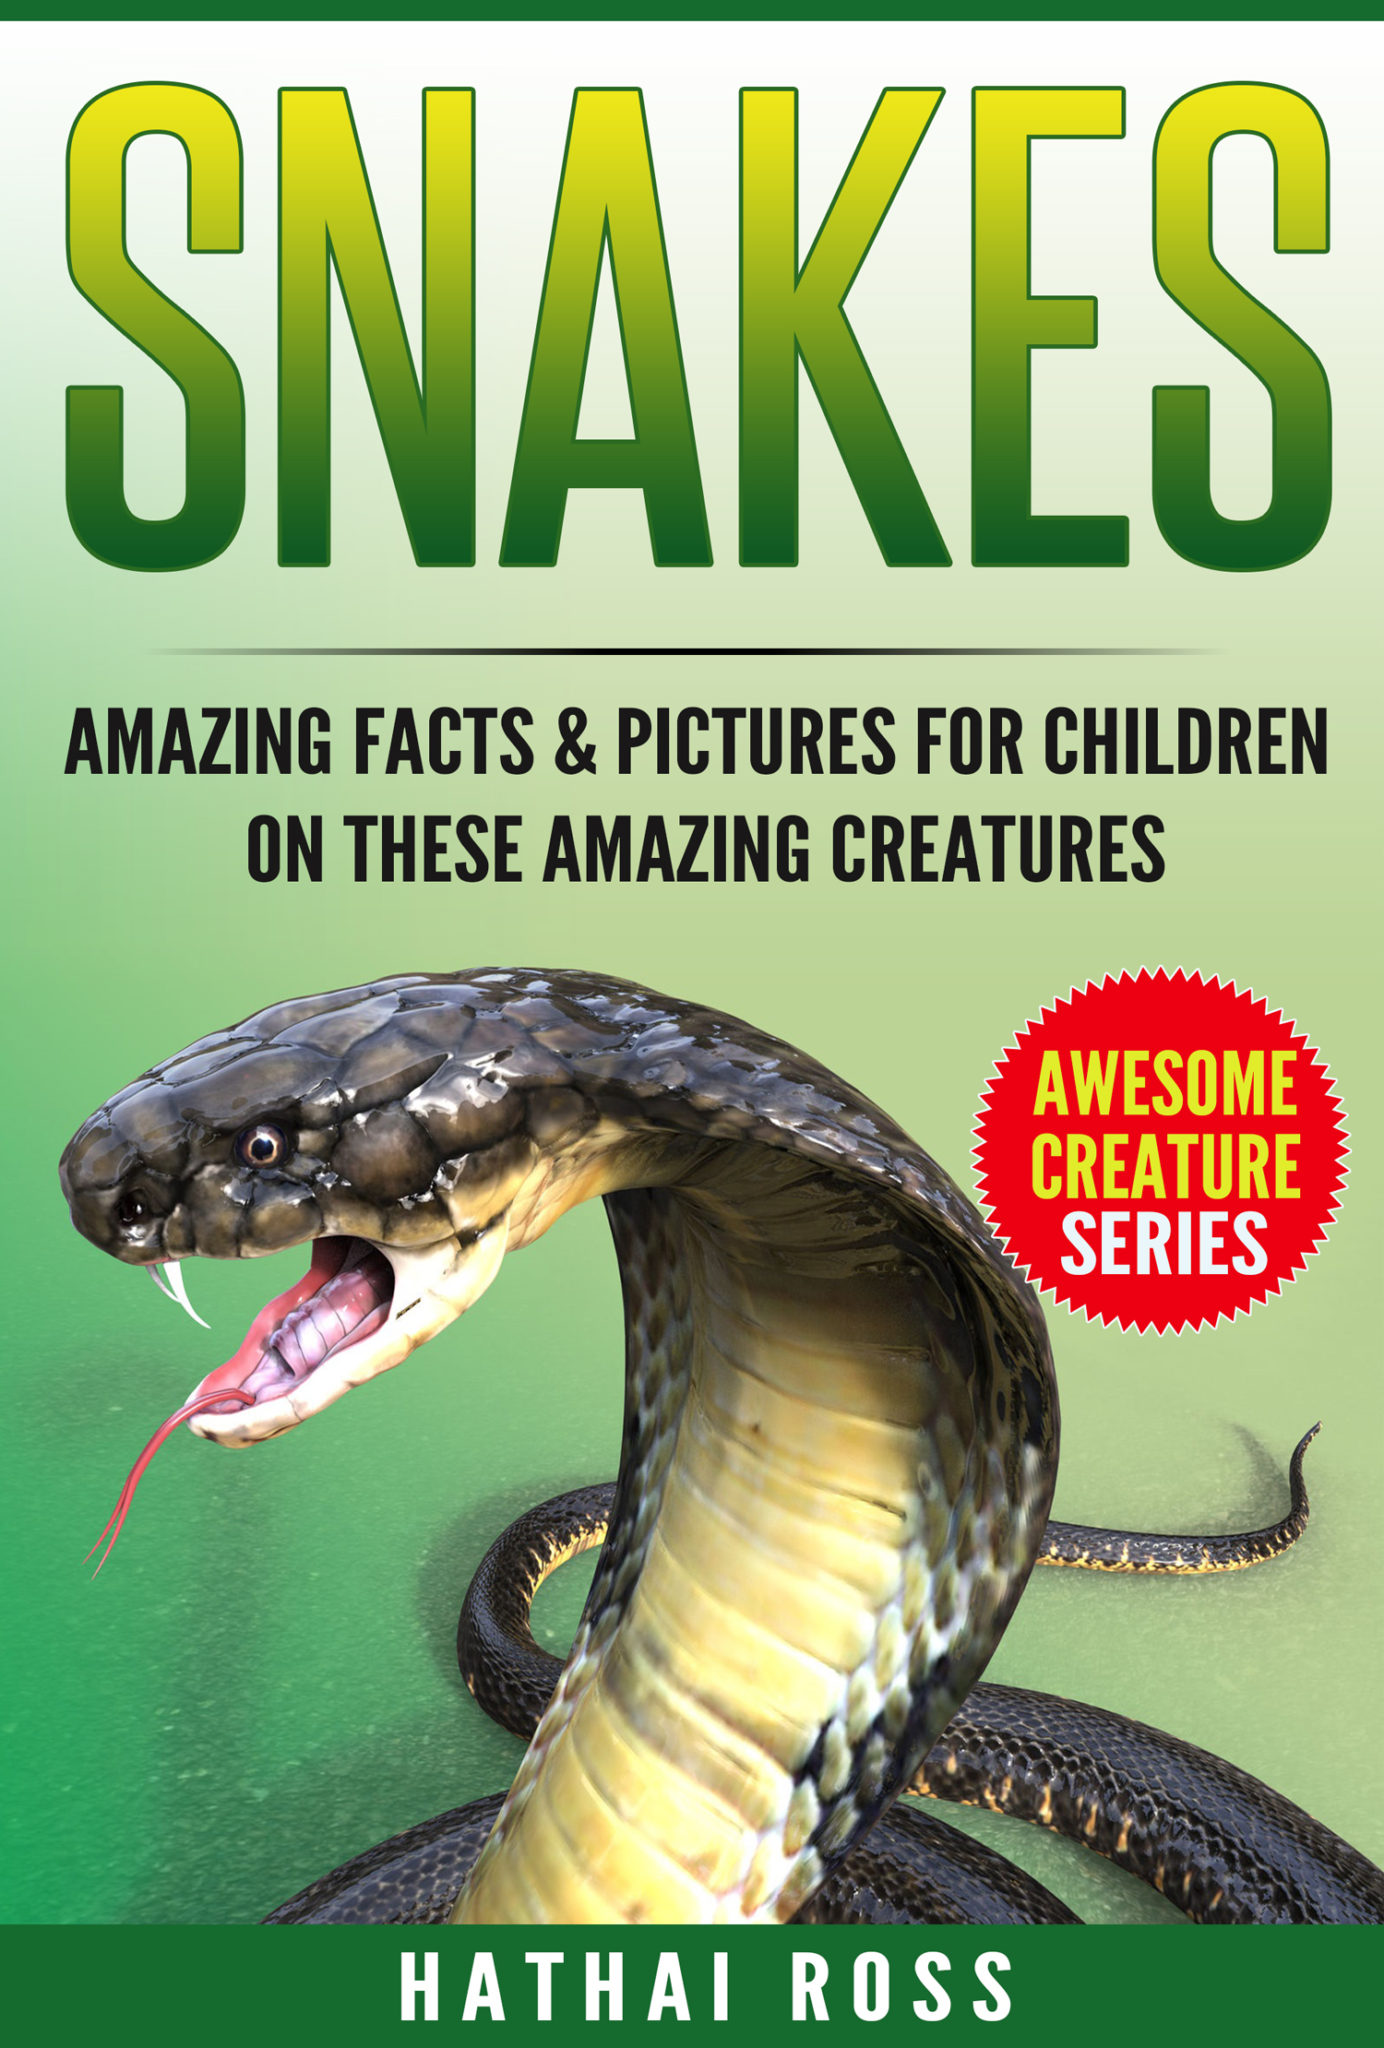 FREE: Snakes: Amazing Facts & Pictures for Children on These Amazing Creatures by Hathai Ross